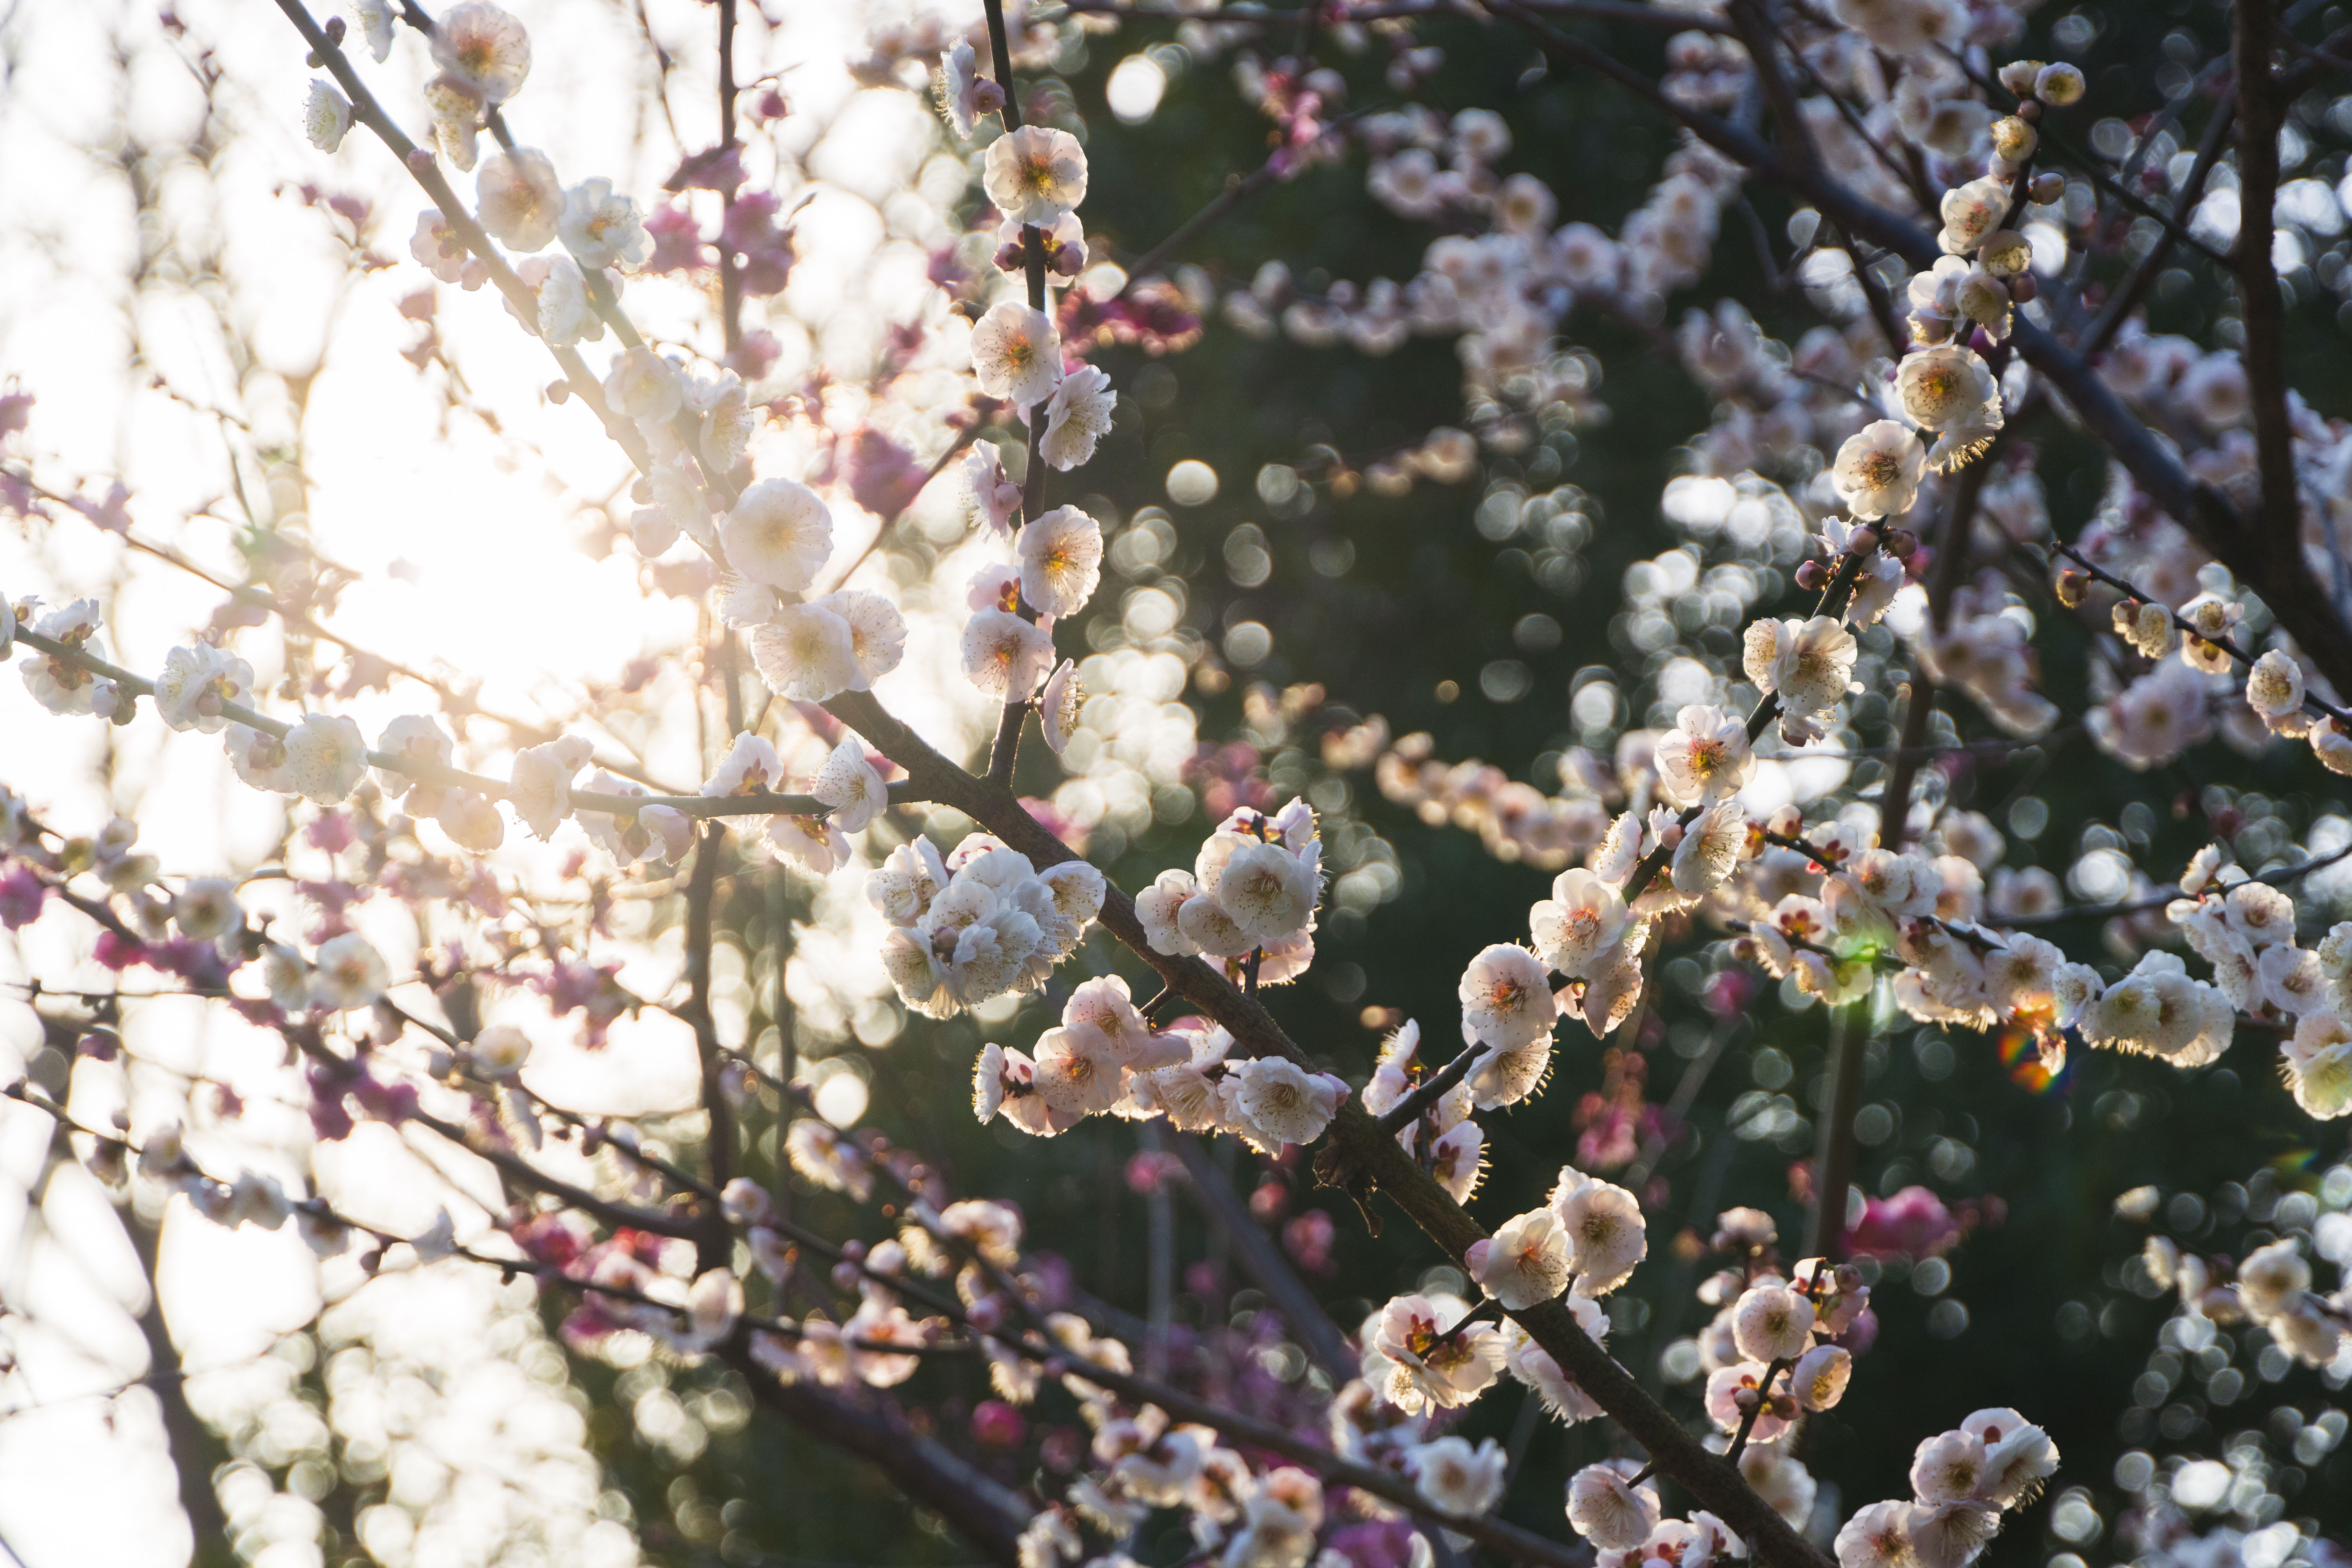 General 6000x4000 spring peach blossom sunlight flowers nature branch